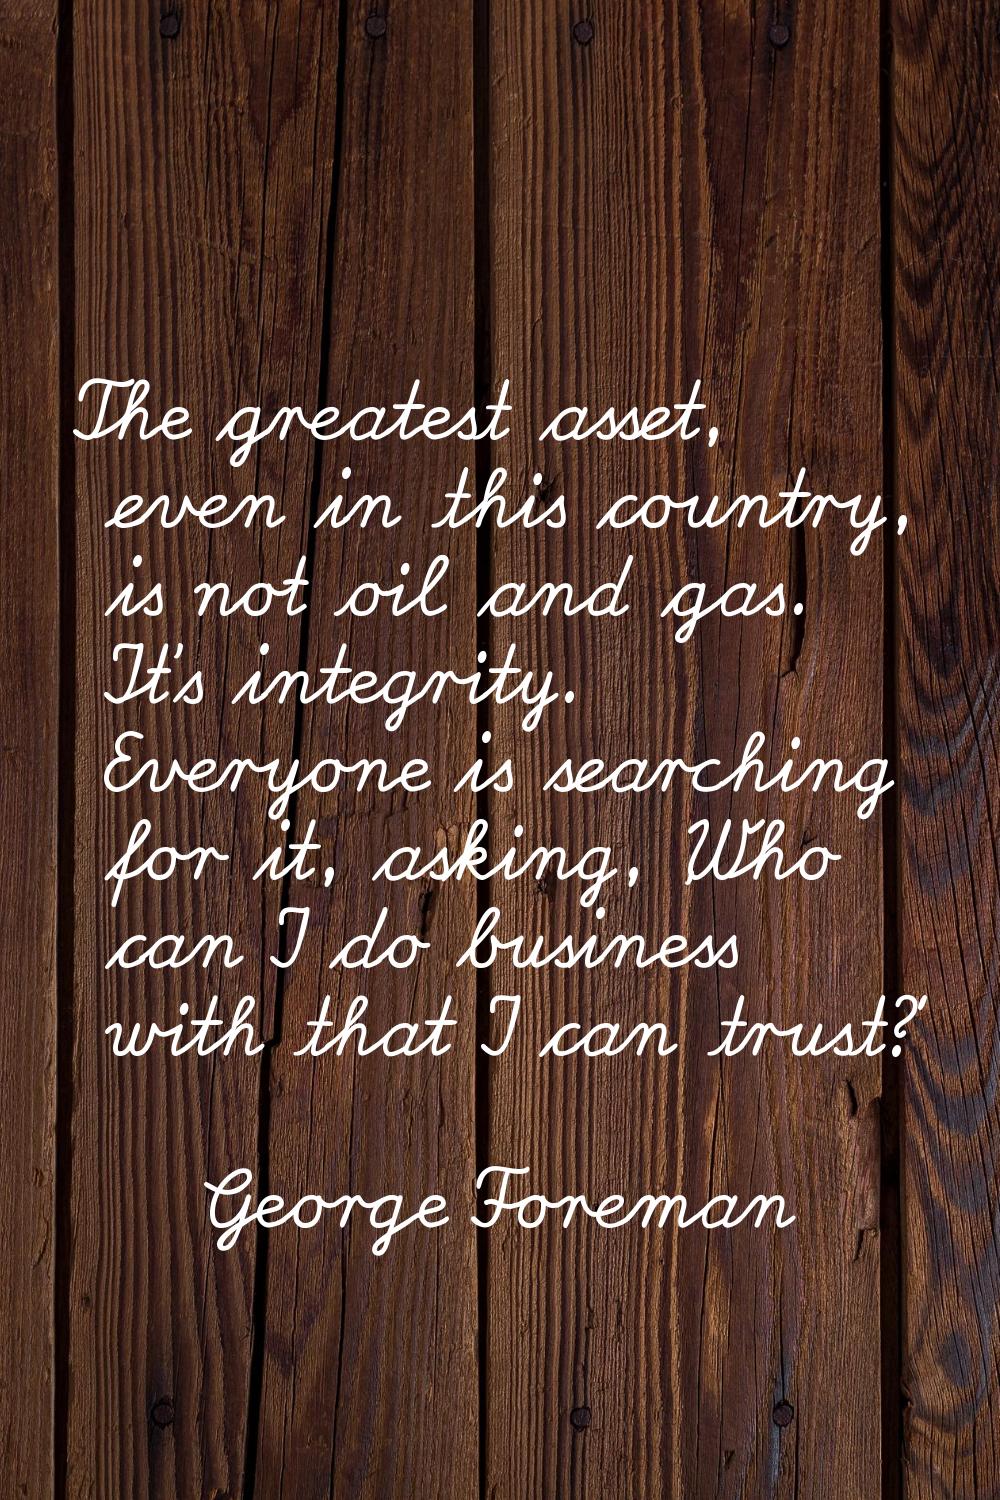 The greatest asset, even in this country, is not oil and gas. It's integrity. Everyone is searching